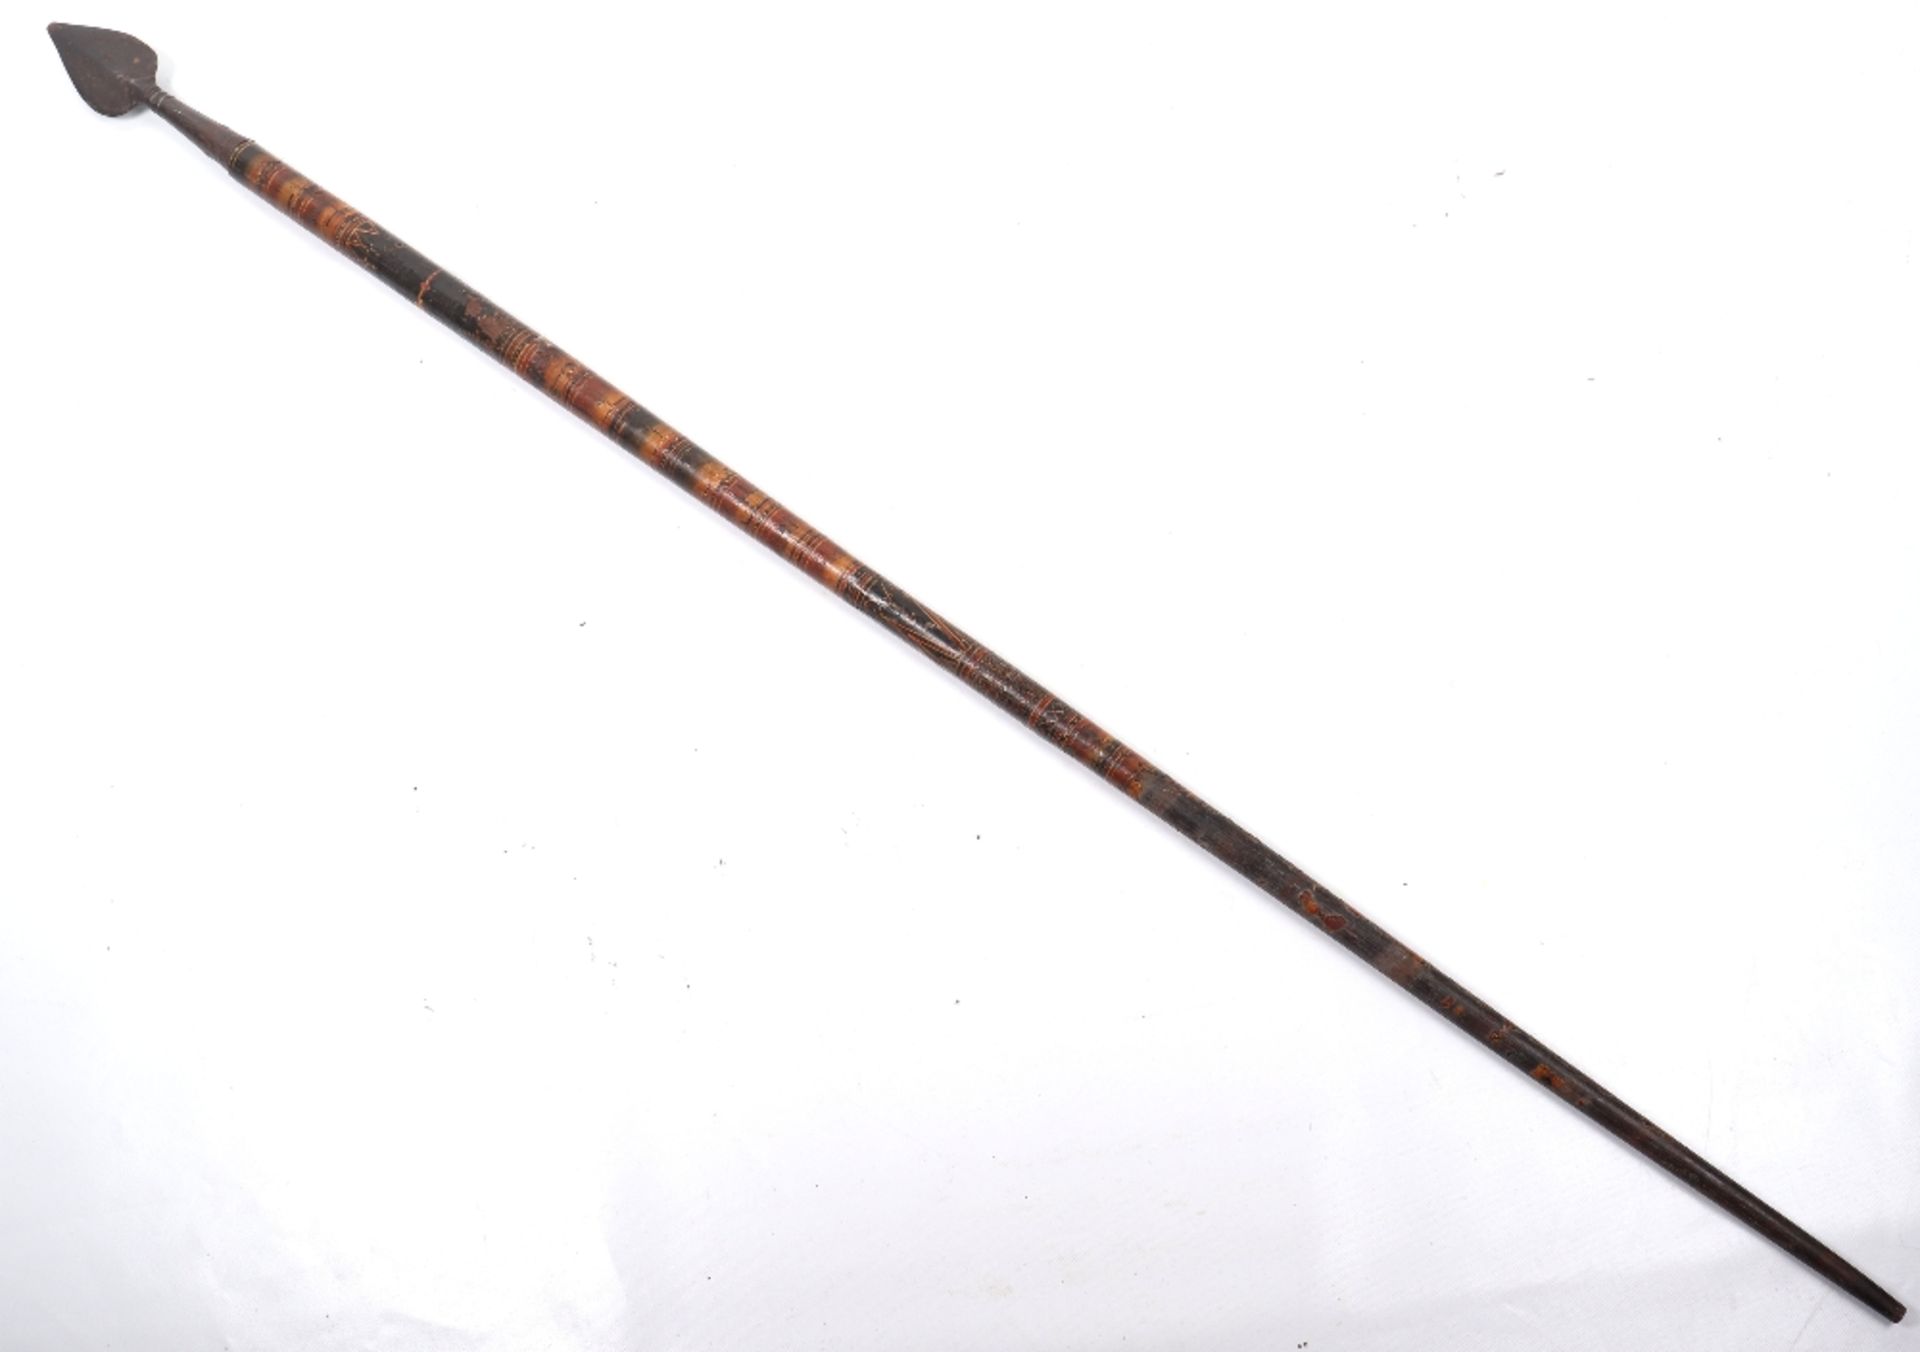 Ceylonese Spear Patisthanaya, Probably 18th or 19th Century - Image 9 of 9